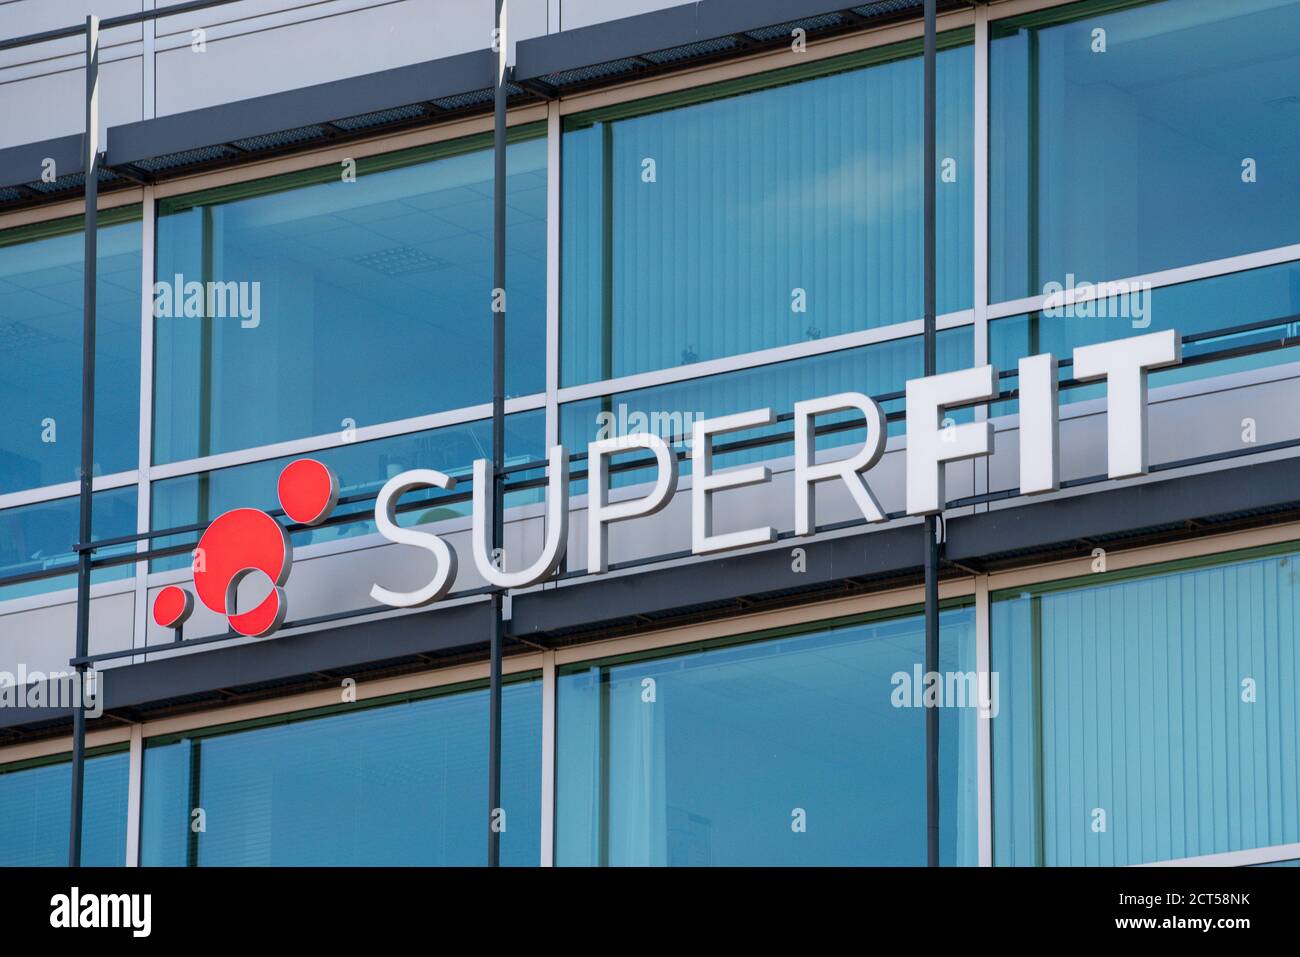 Superfit High Resolution Stock Photography and Images - Alamy